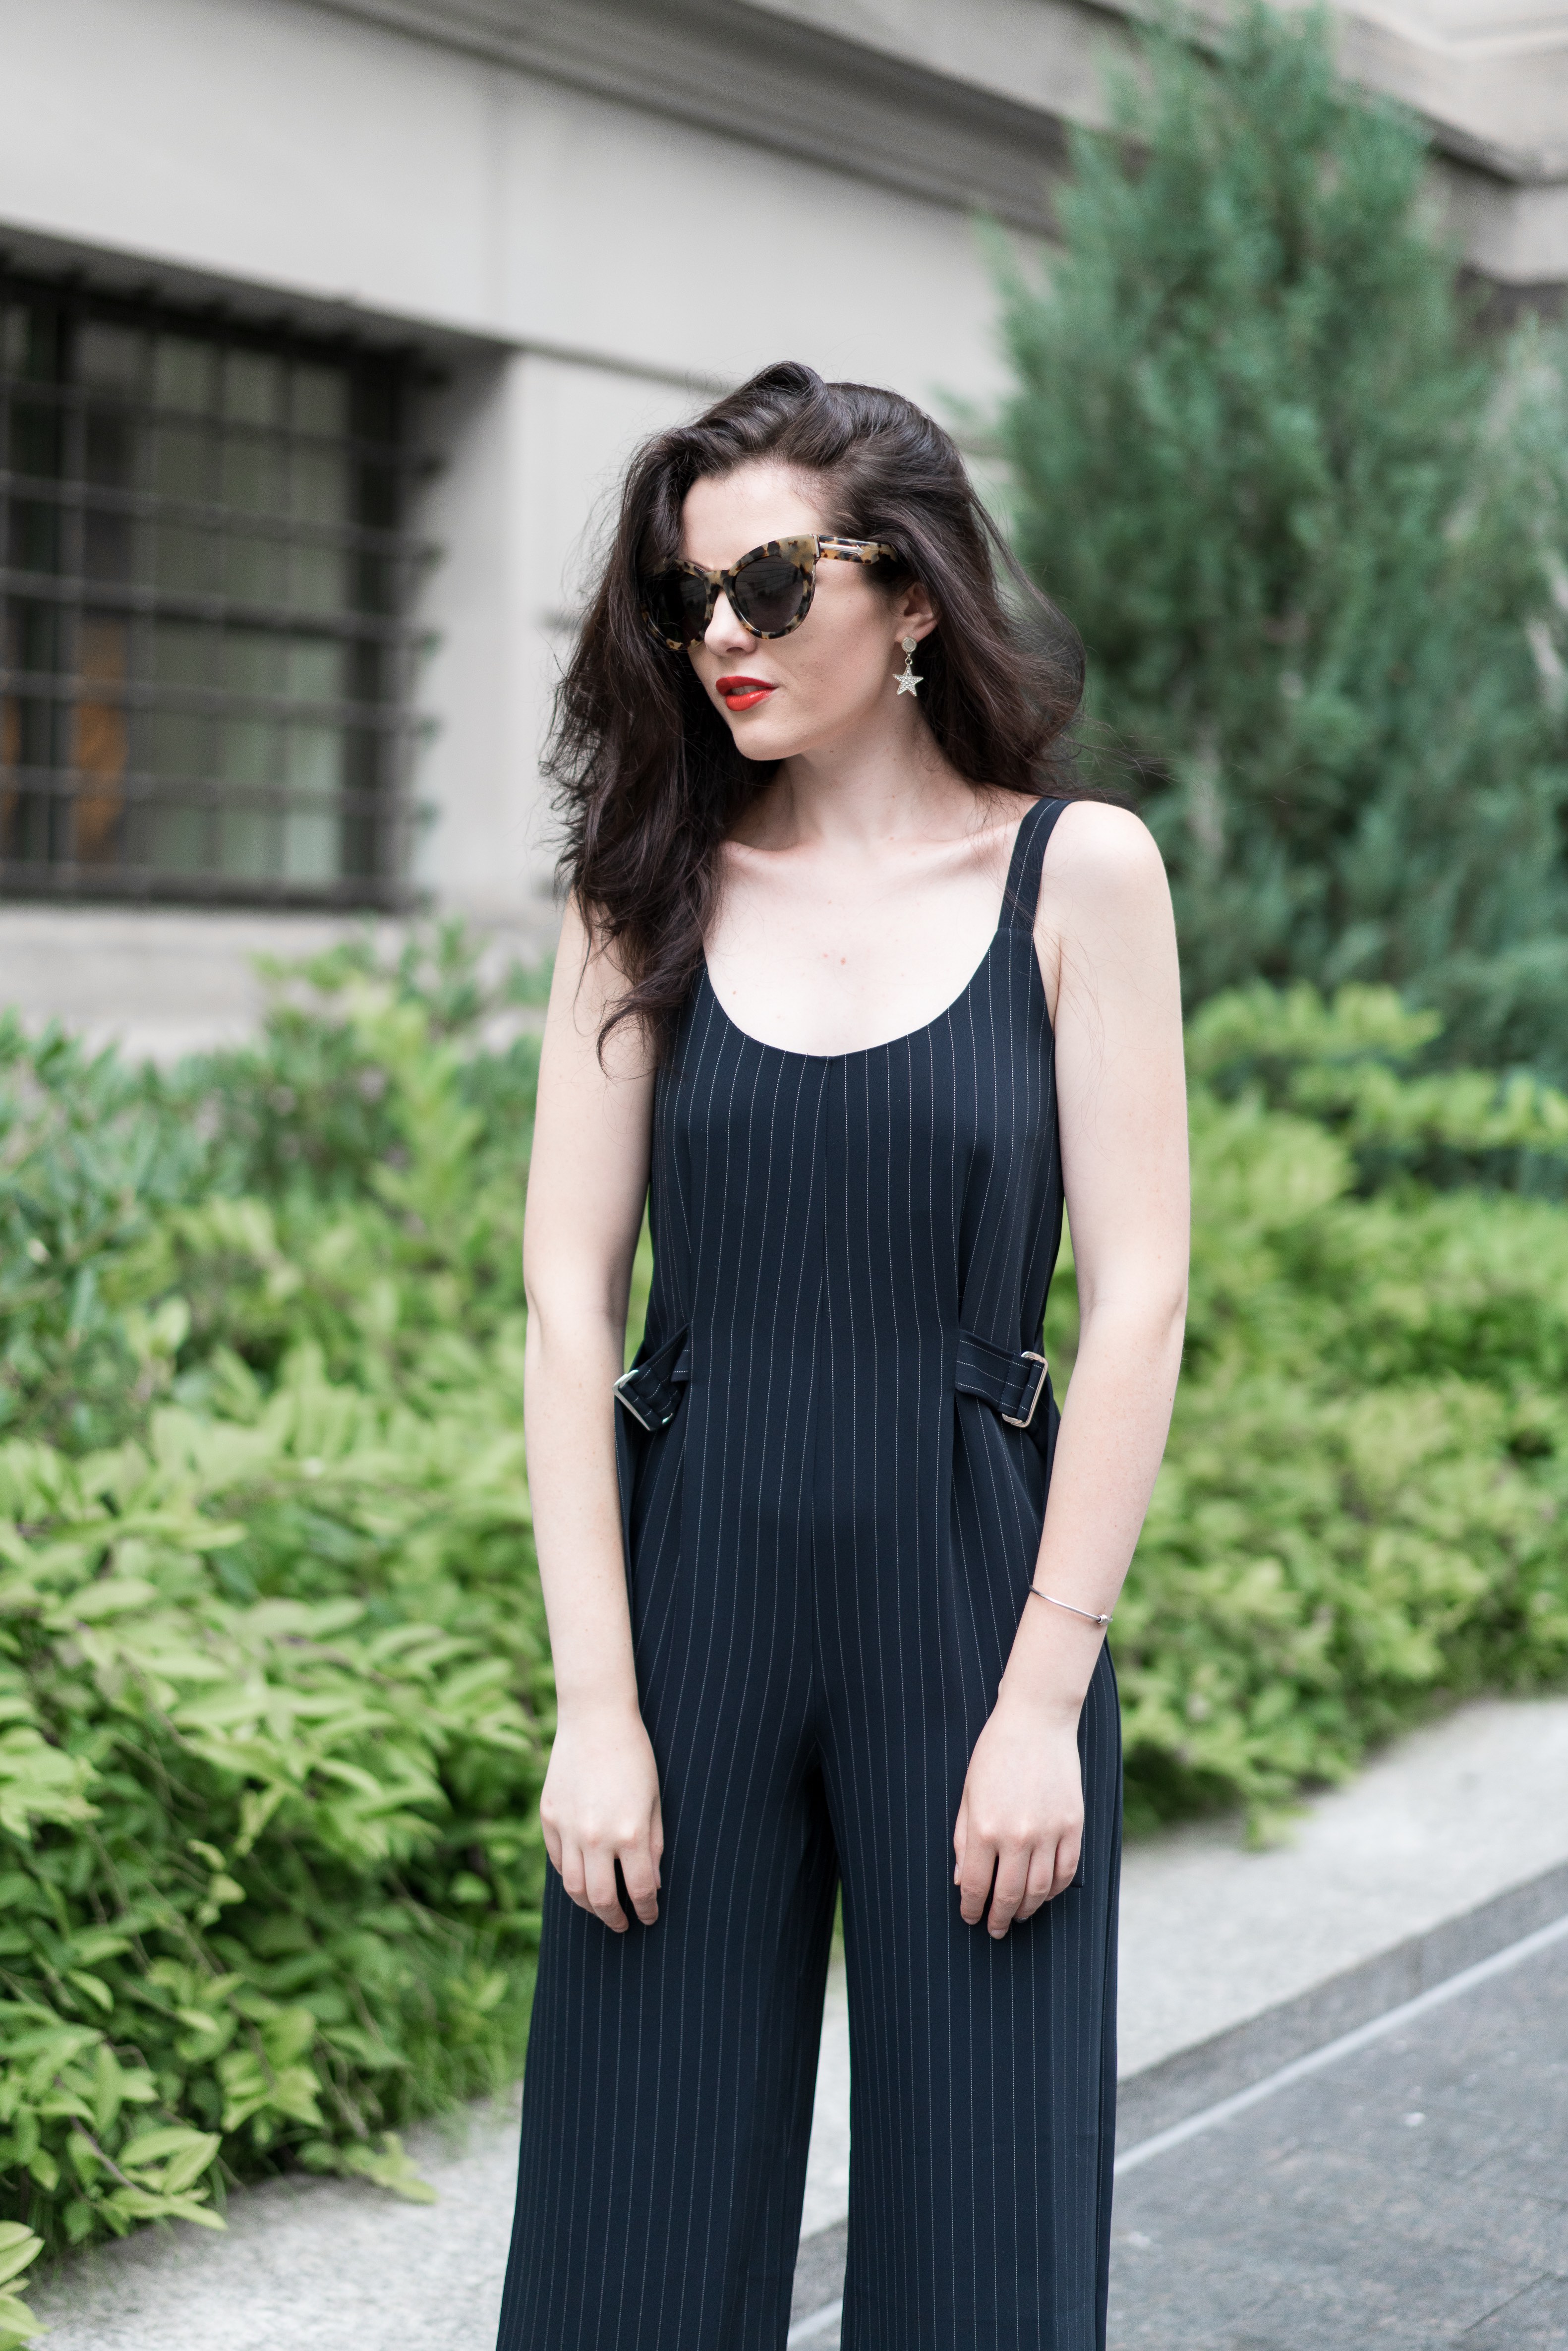 How to style a jumpsuit2